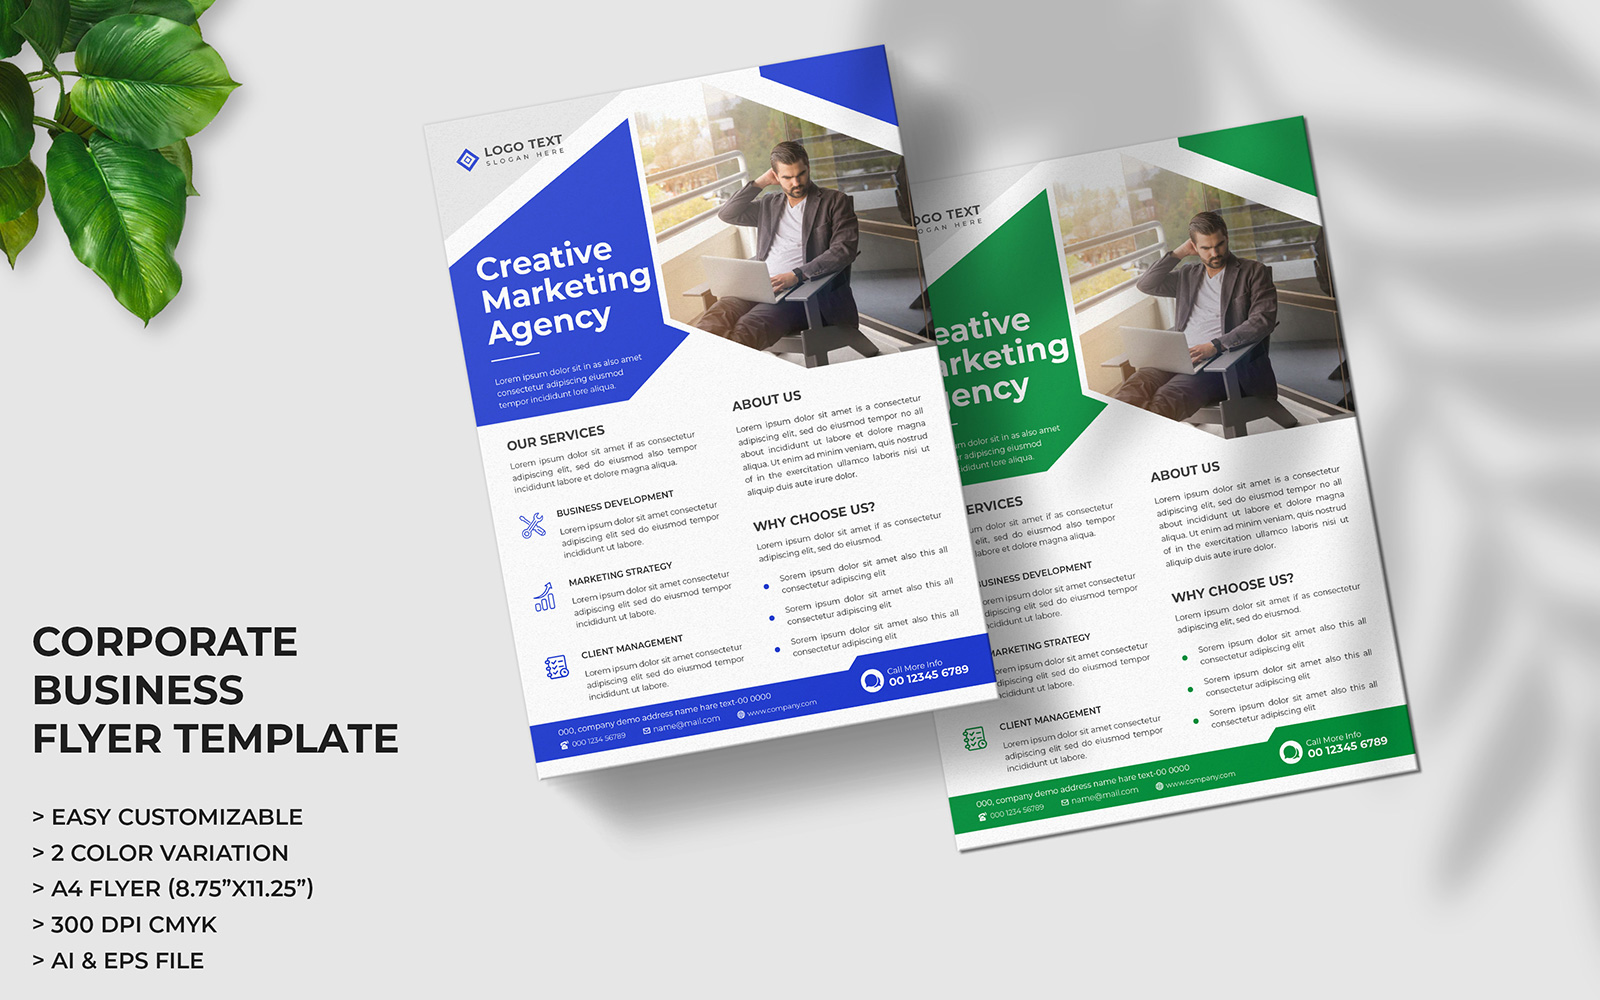 Corporate business agency flyer template